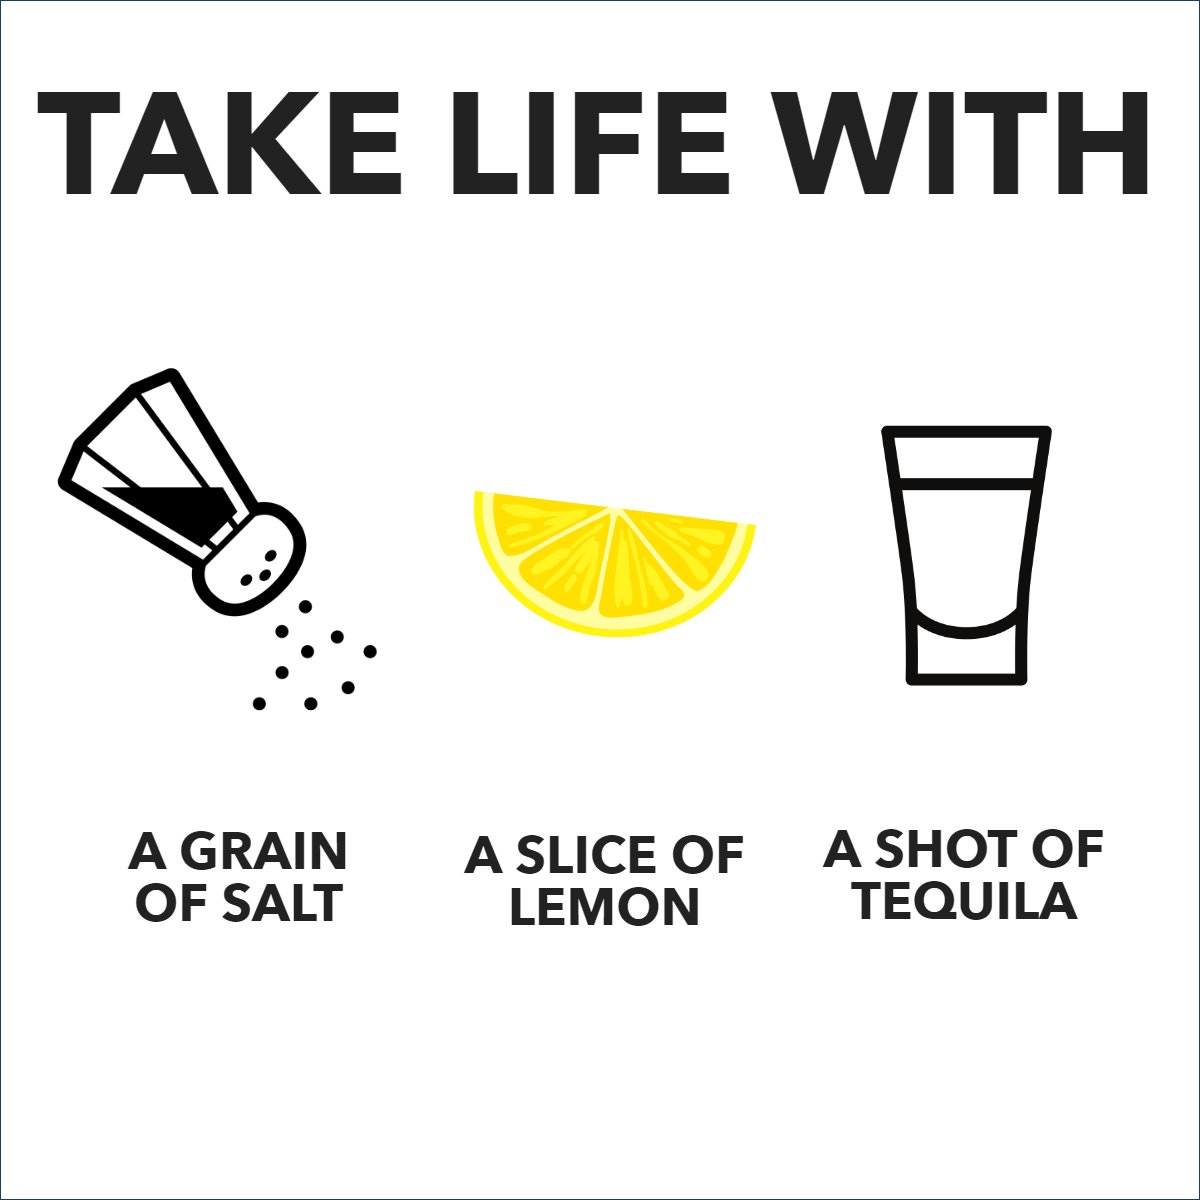 Take life with a grain of salt, a slice of lemon and a shot of tequila... 🧂🍋🥃

#lifeisbetteratthebeach    #tequilashots    #makelifebetter    #lemonslice    #tequilashot    #positive    #positivethinking
#newschoolrealtor